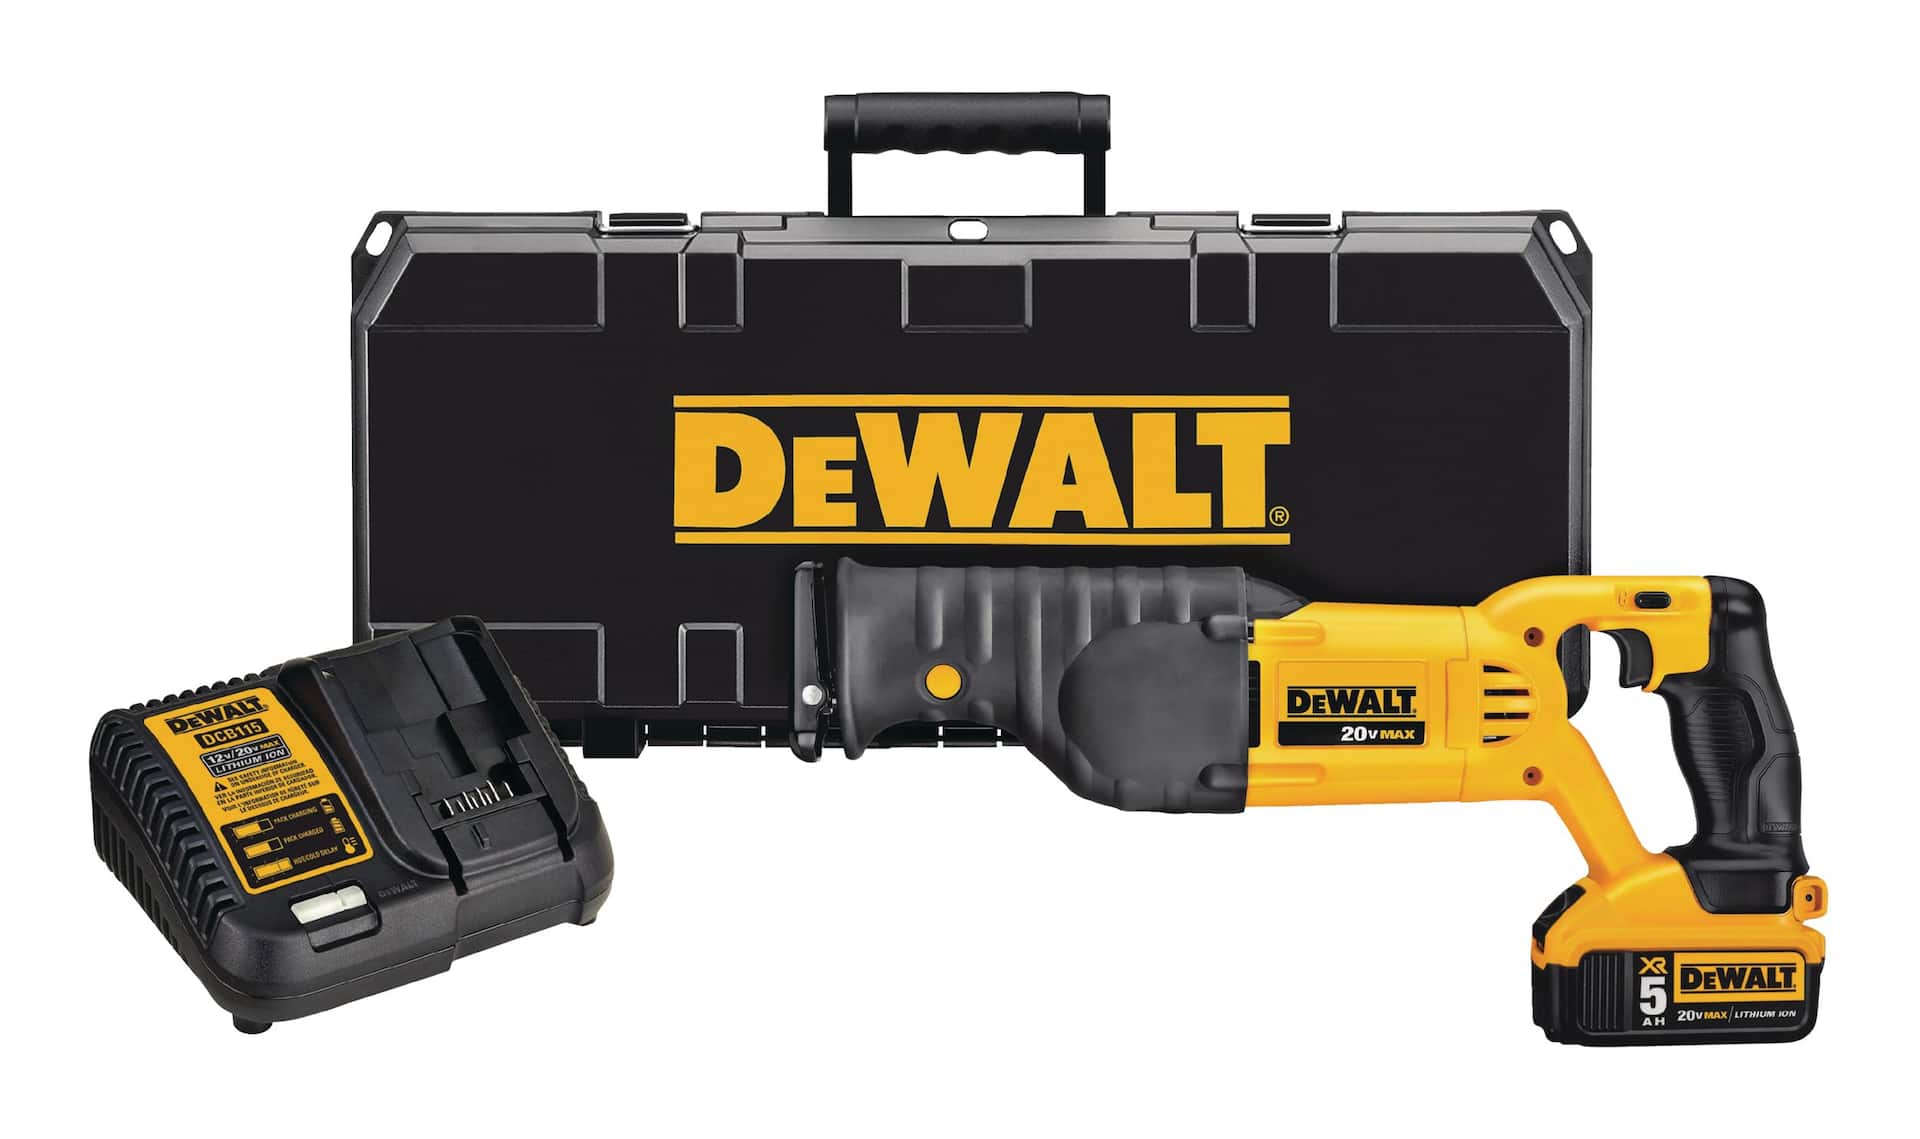 DEWALT DCS380P1 20V MAX Lithium-Ion Cordless Reciprocating Saw Kit with  Battery, Charger & Case